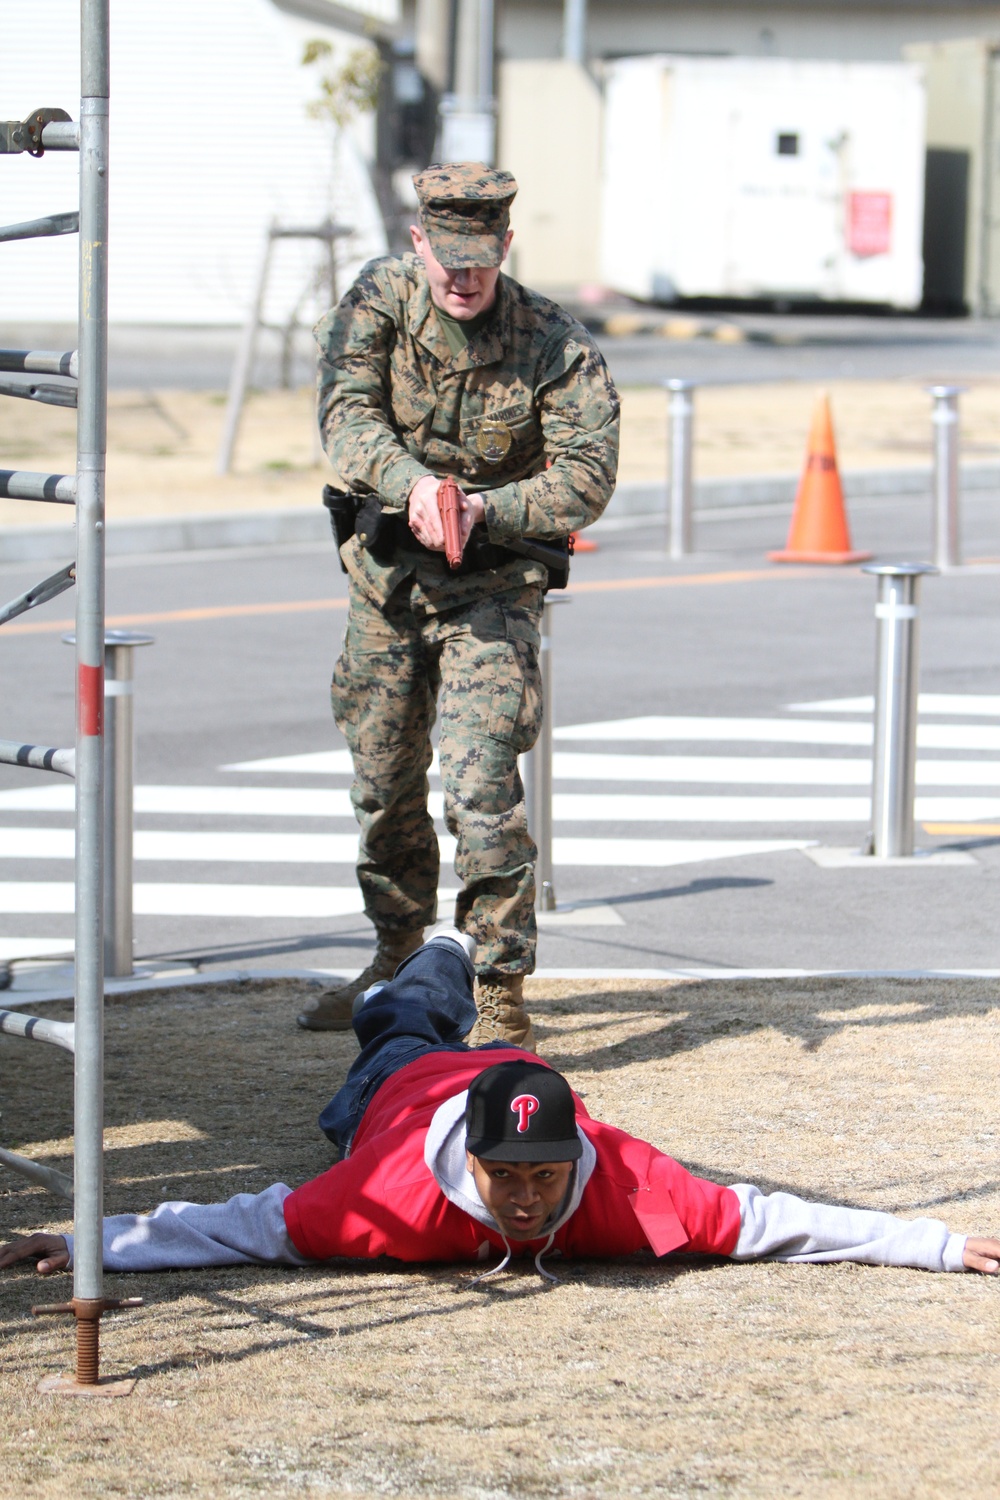 Active Shield 2013 tests station personnel crisis response, readiness